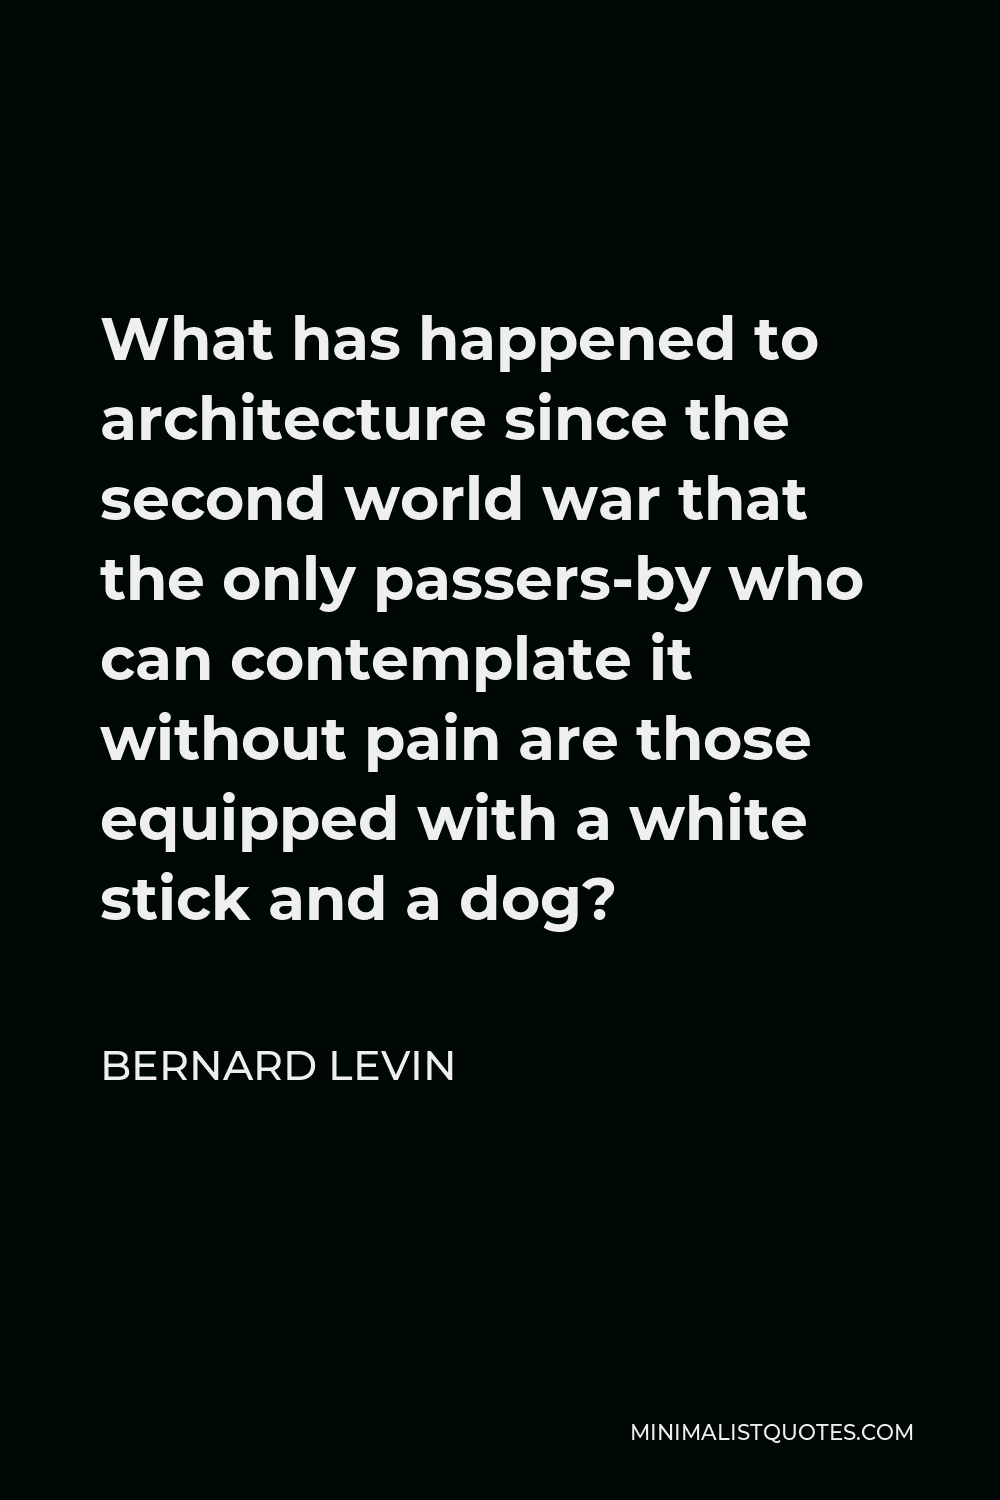 Bernard Levin Quote - What has happened to architecture since the second world war that the only passers-by who can contemplate it without pain are those equipped with a white stick and a dog?